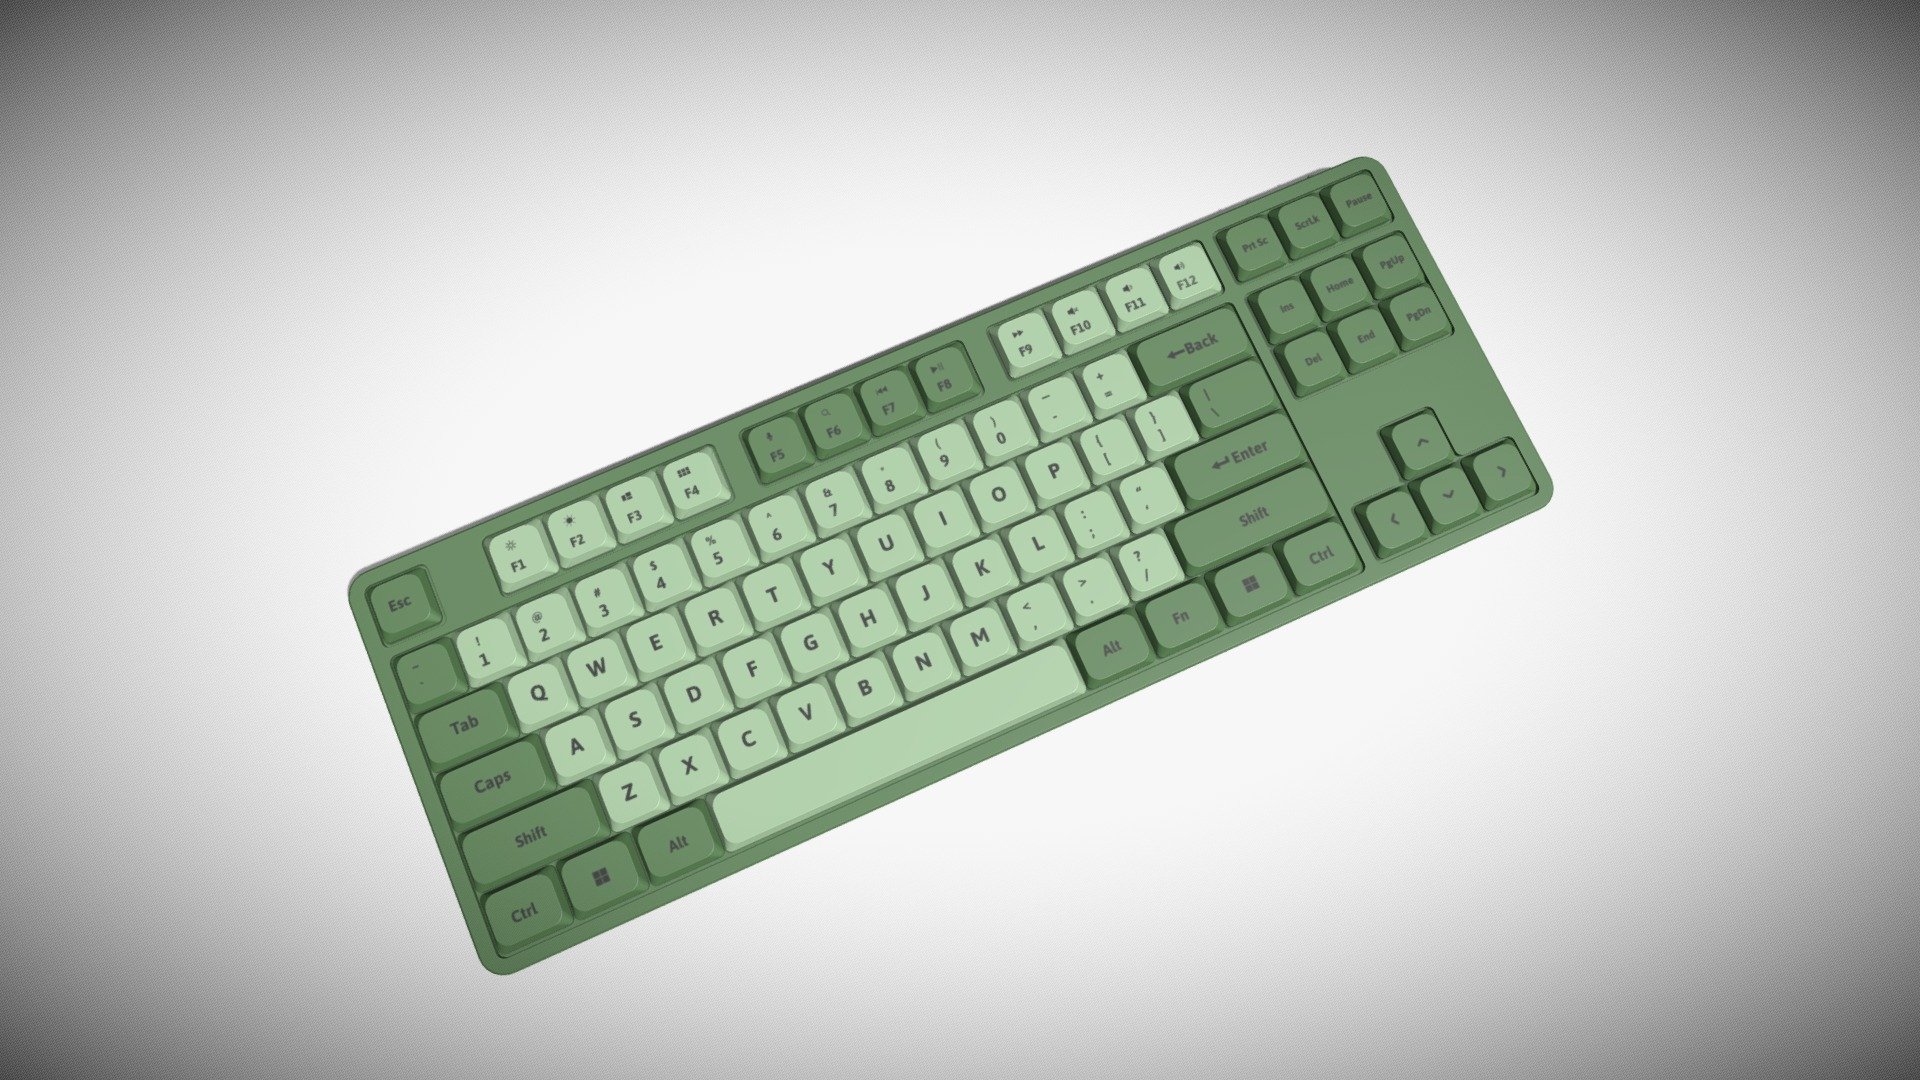 Detailed model of a green Tenkeyless Keyboard, modeled in Cinema 4D.The model was created using approximate real world dimensions.

The model has 55,979 polys and 56,110 vertices.

An additional file has been provided containing the original Cinema 4D project files with both standard and v-ray materials, textures and other 3d export files such as 3ds, fbx and obj 3d model